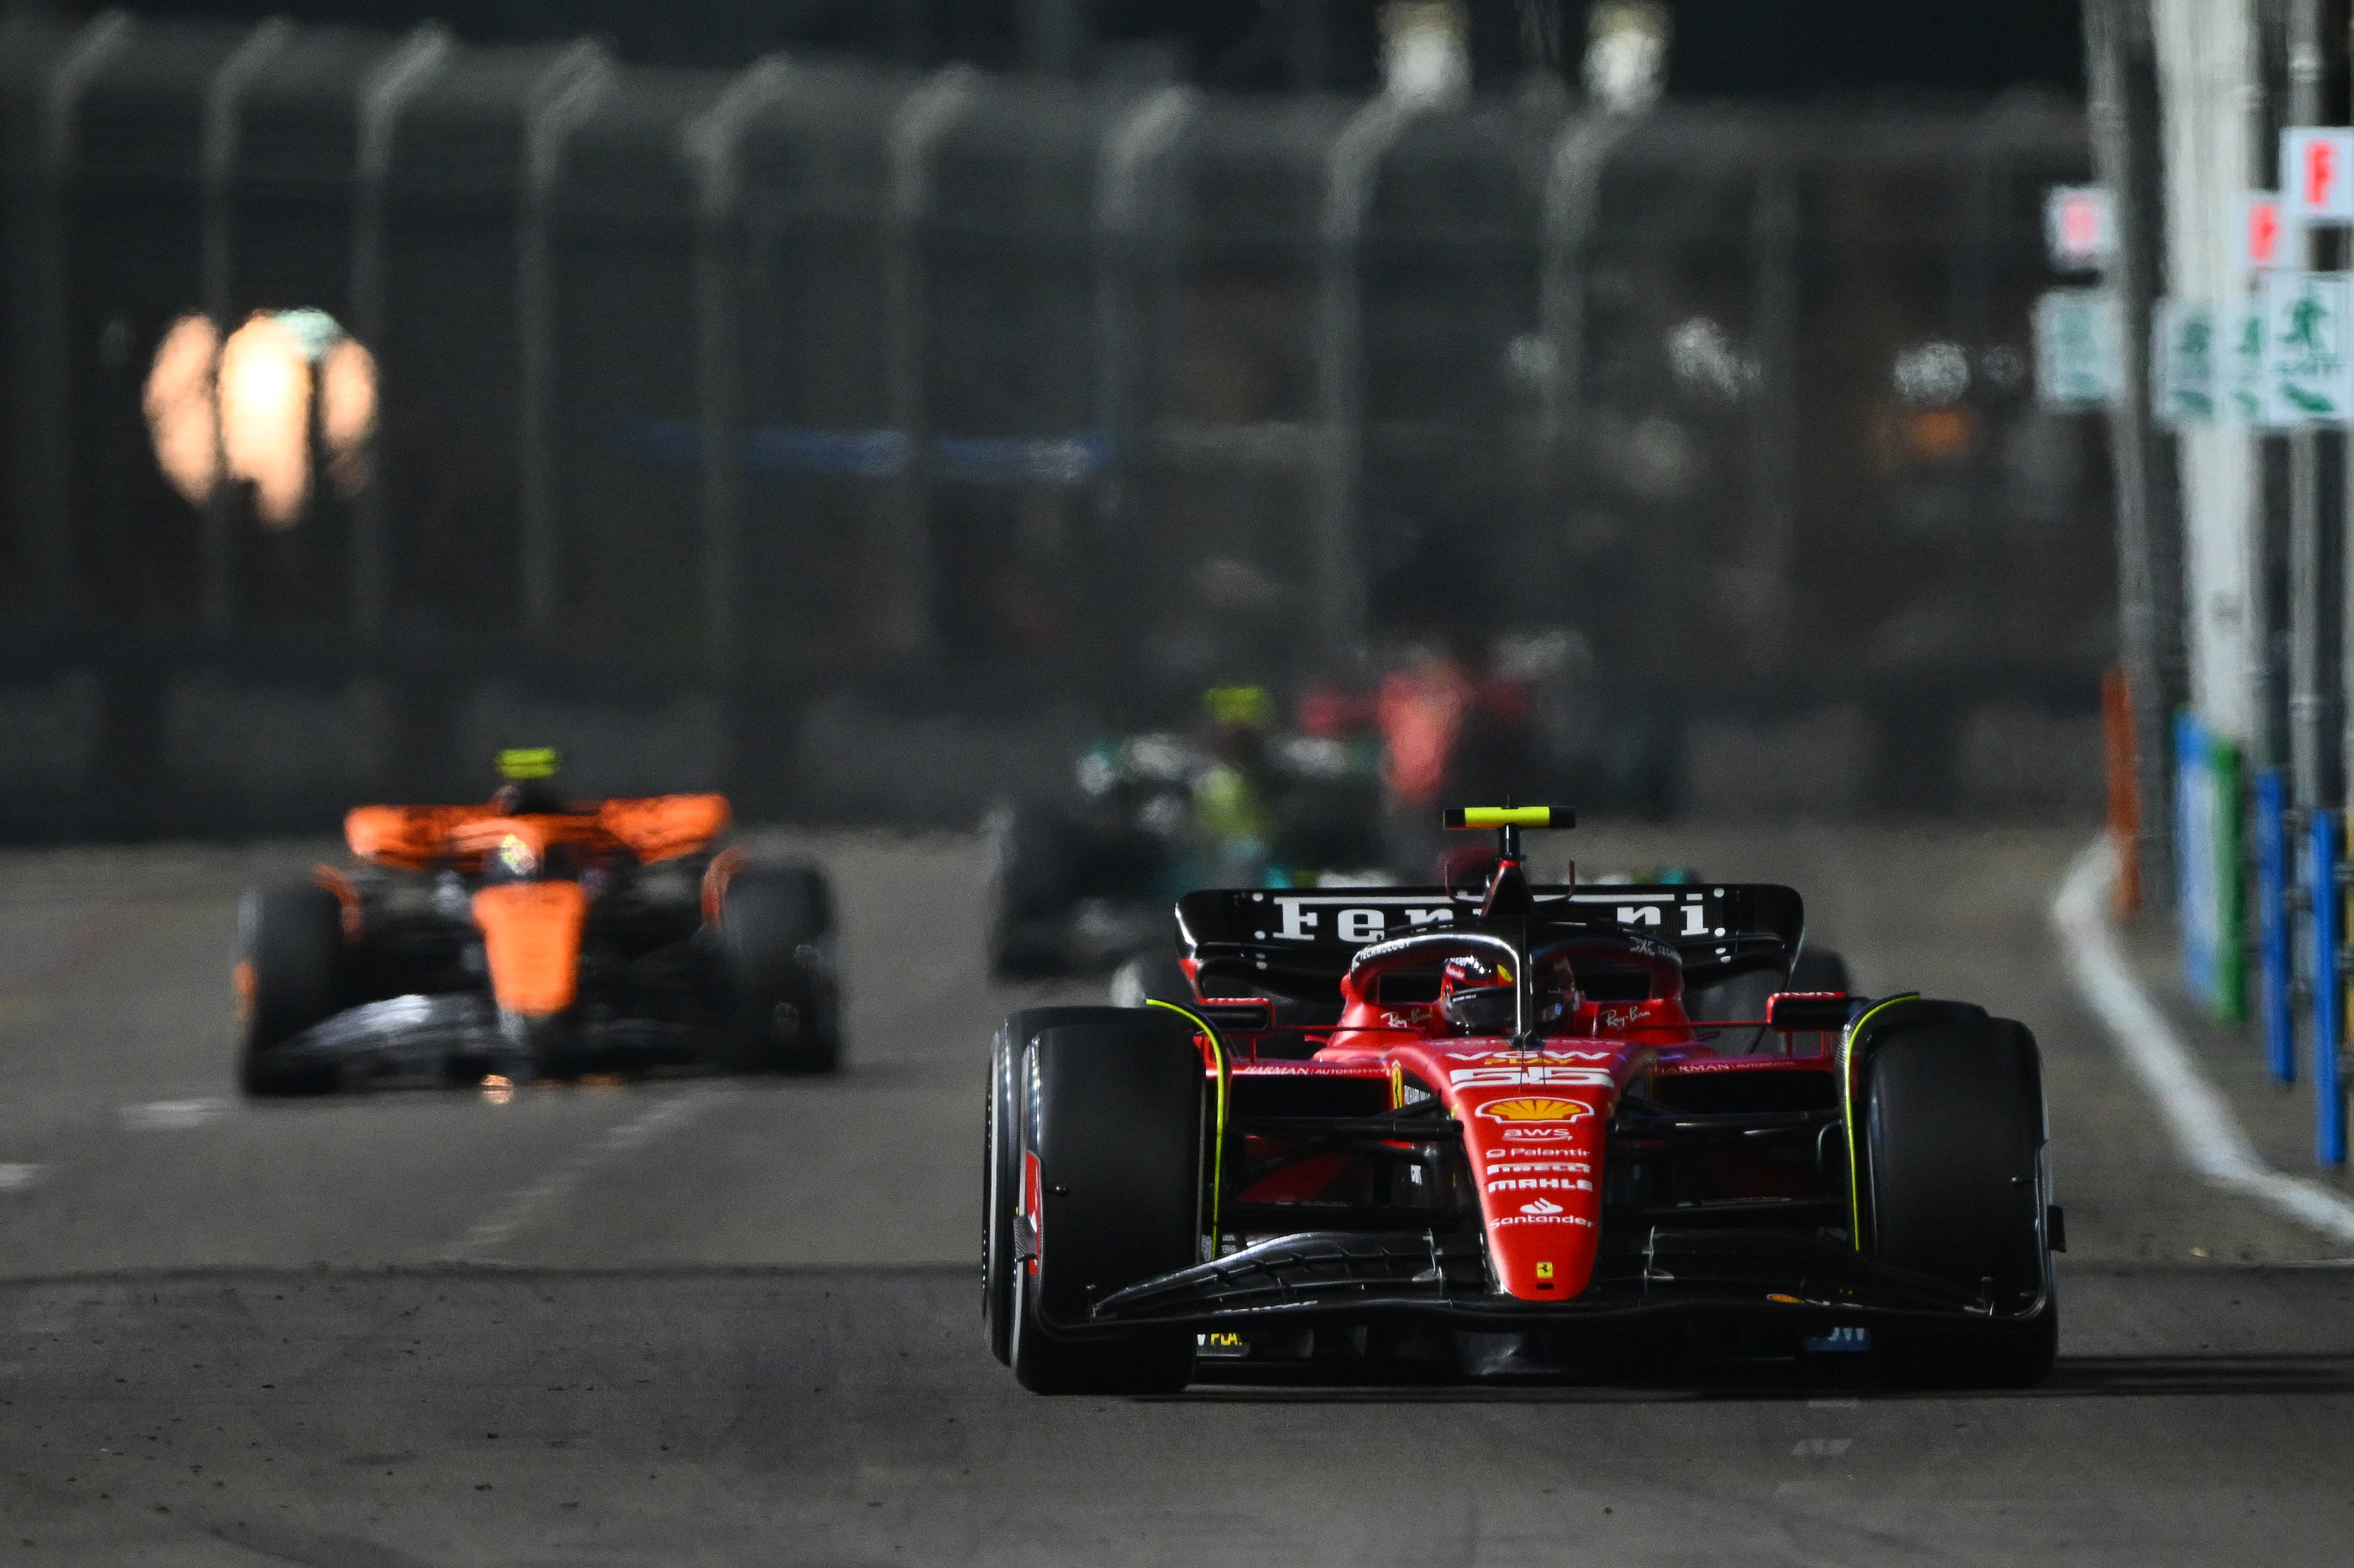 Carlos Sainz secured victory in Singapore by giving Lando Norris in second a helping hand